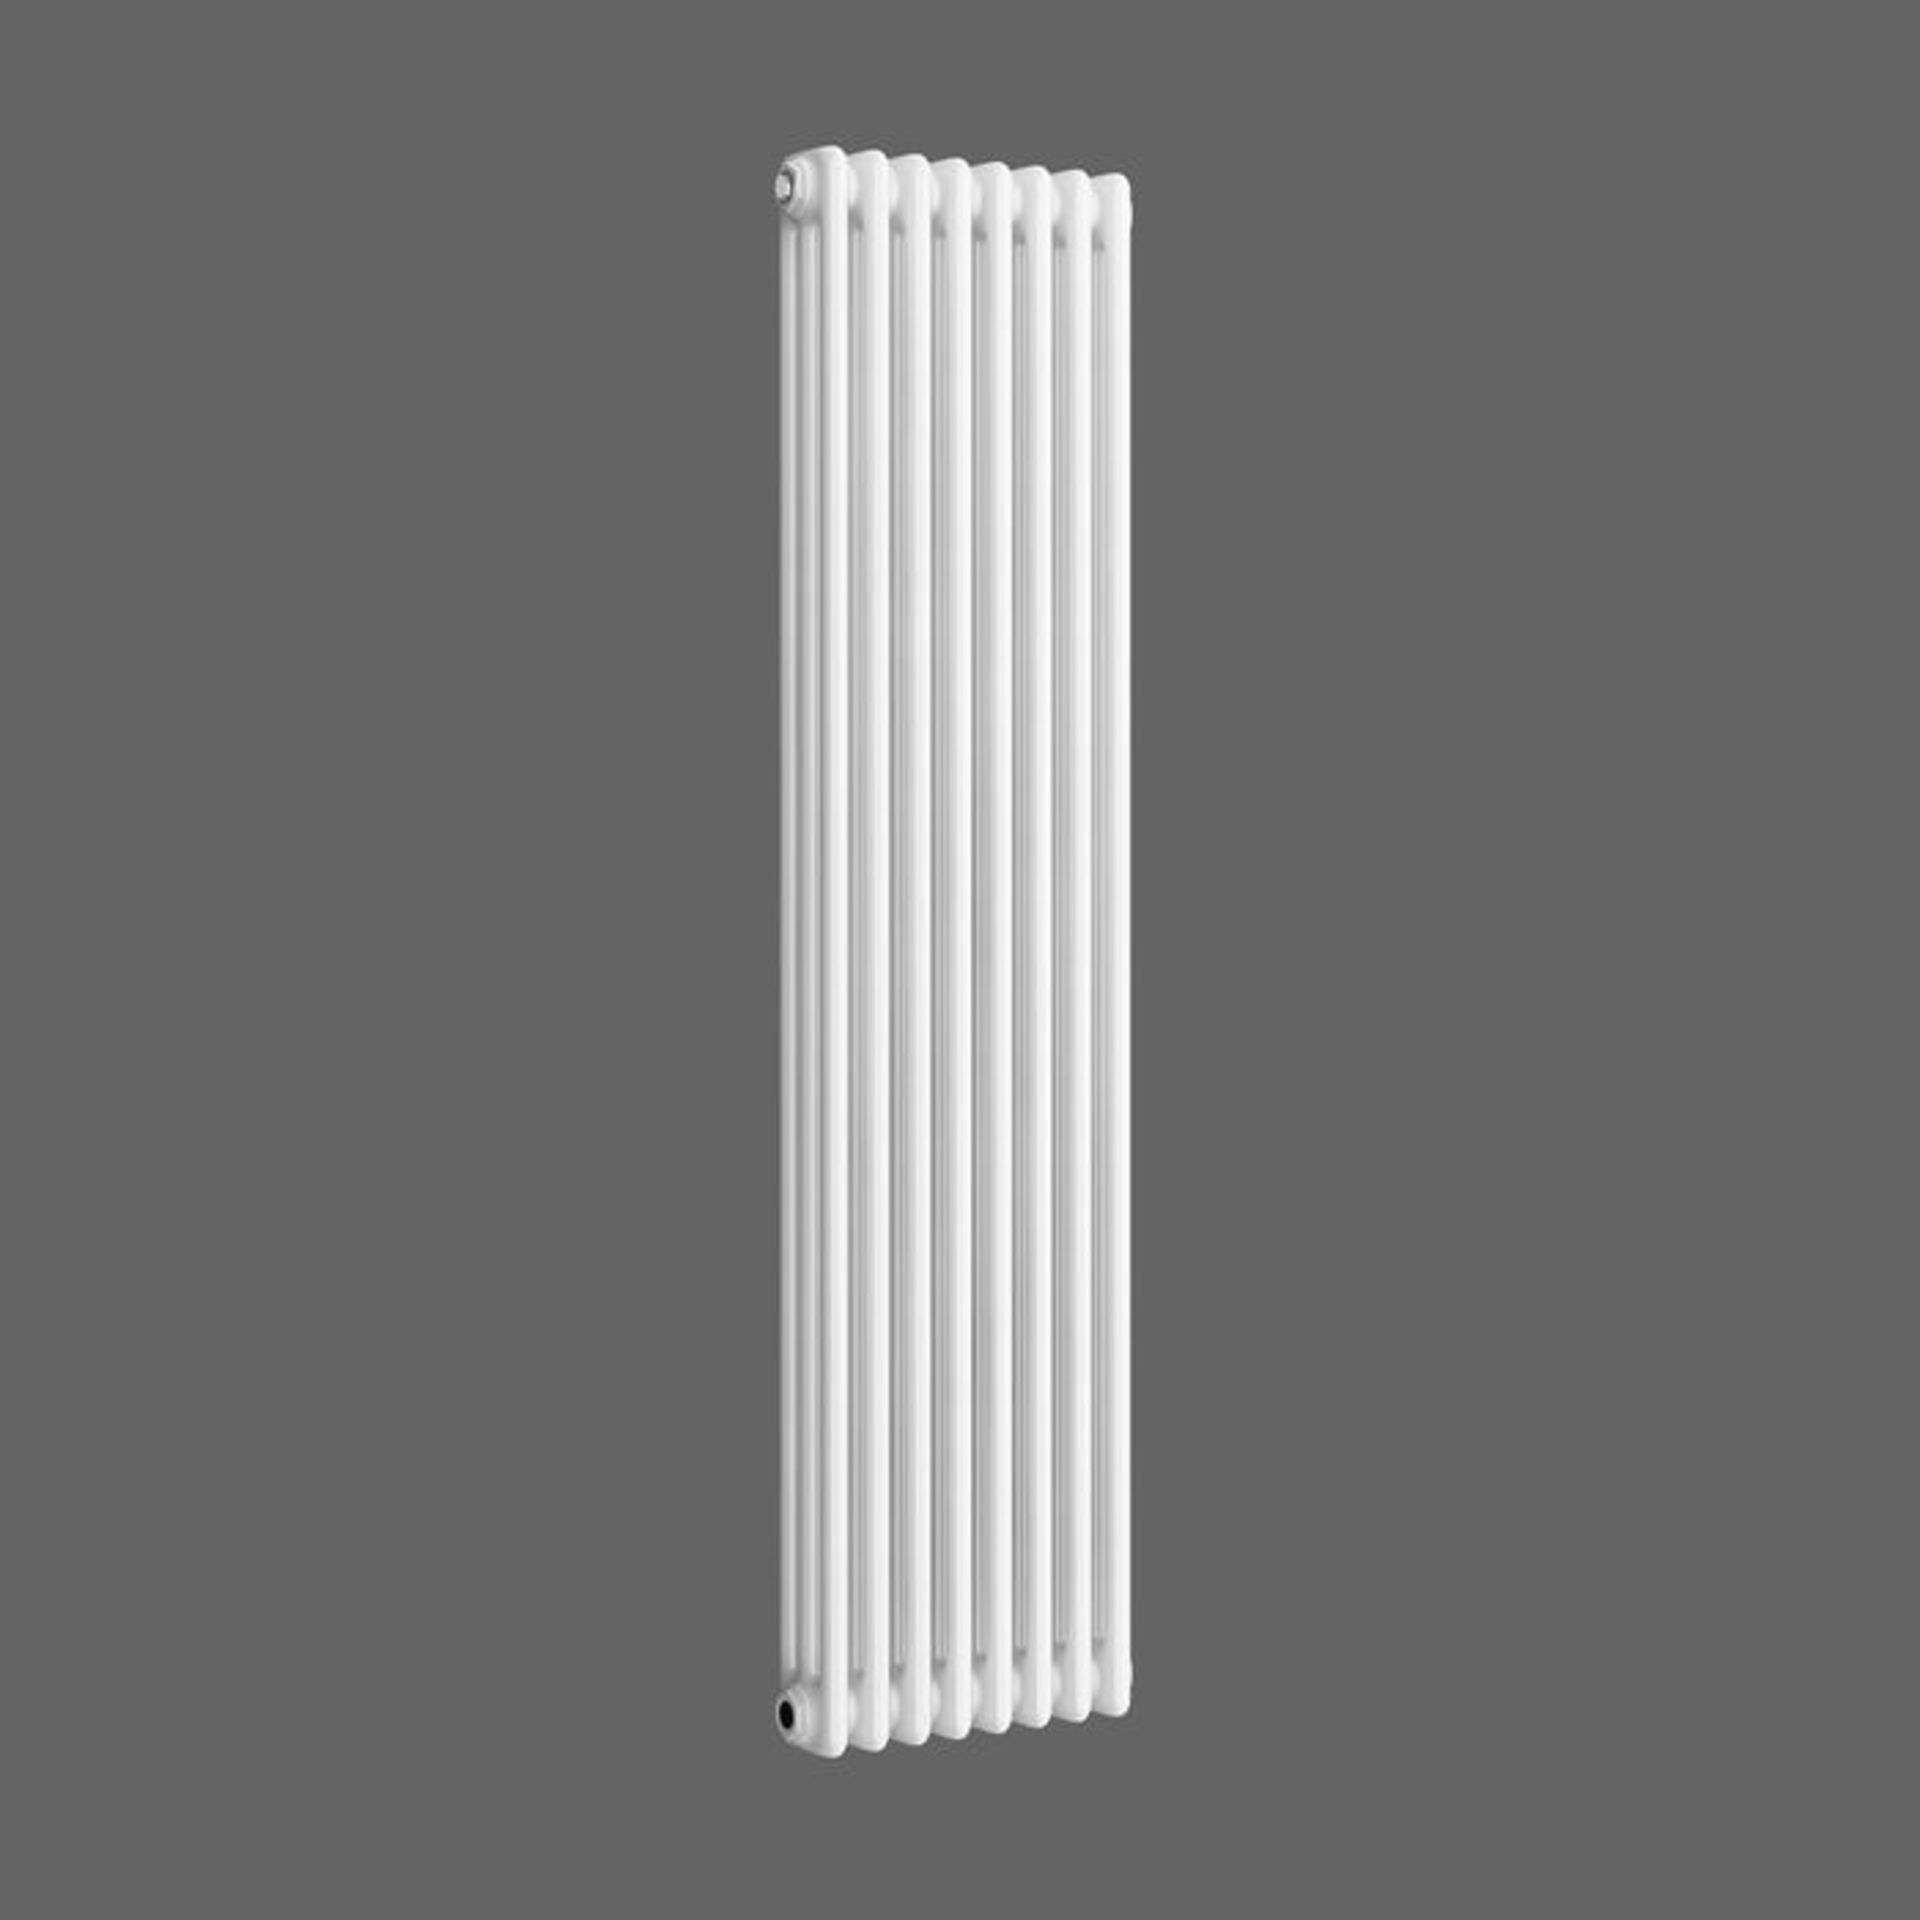 (S6) 1500x380mm White Triple Panel Vertical Colosseum Traditional Radiator RRP £371.99 Low carbon - Image 4 of 4